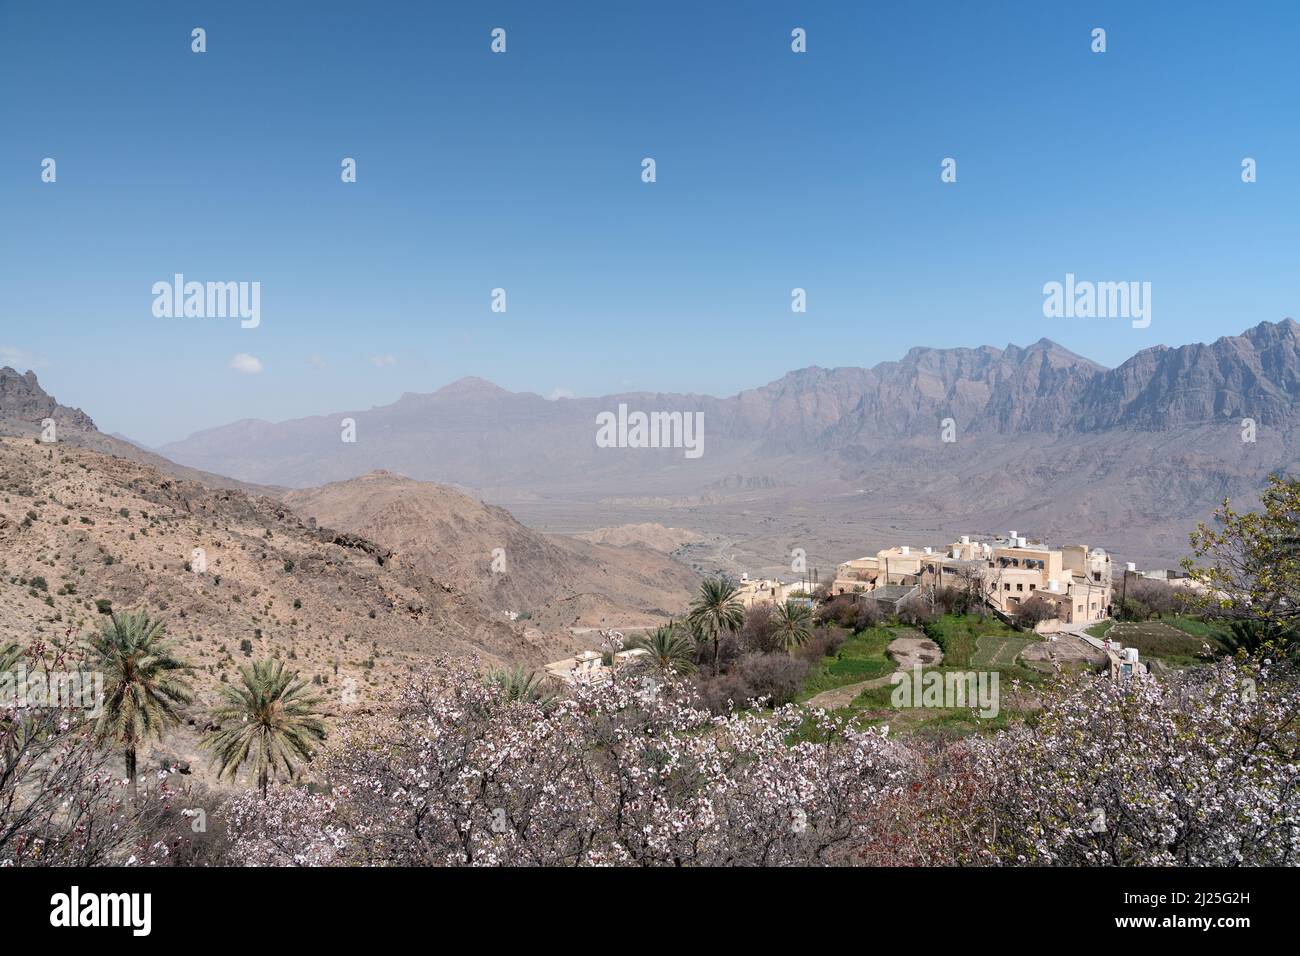 View of the traditional Omani village of Wakan, overlooking the Gubrah Bowl and Hajar Mountains, seen from a blossom and palm filled plantation above Stock Photo